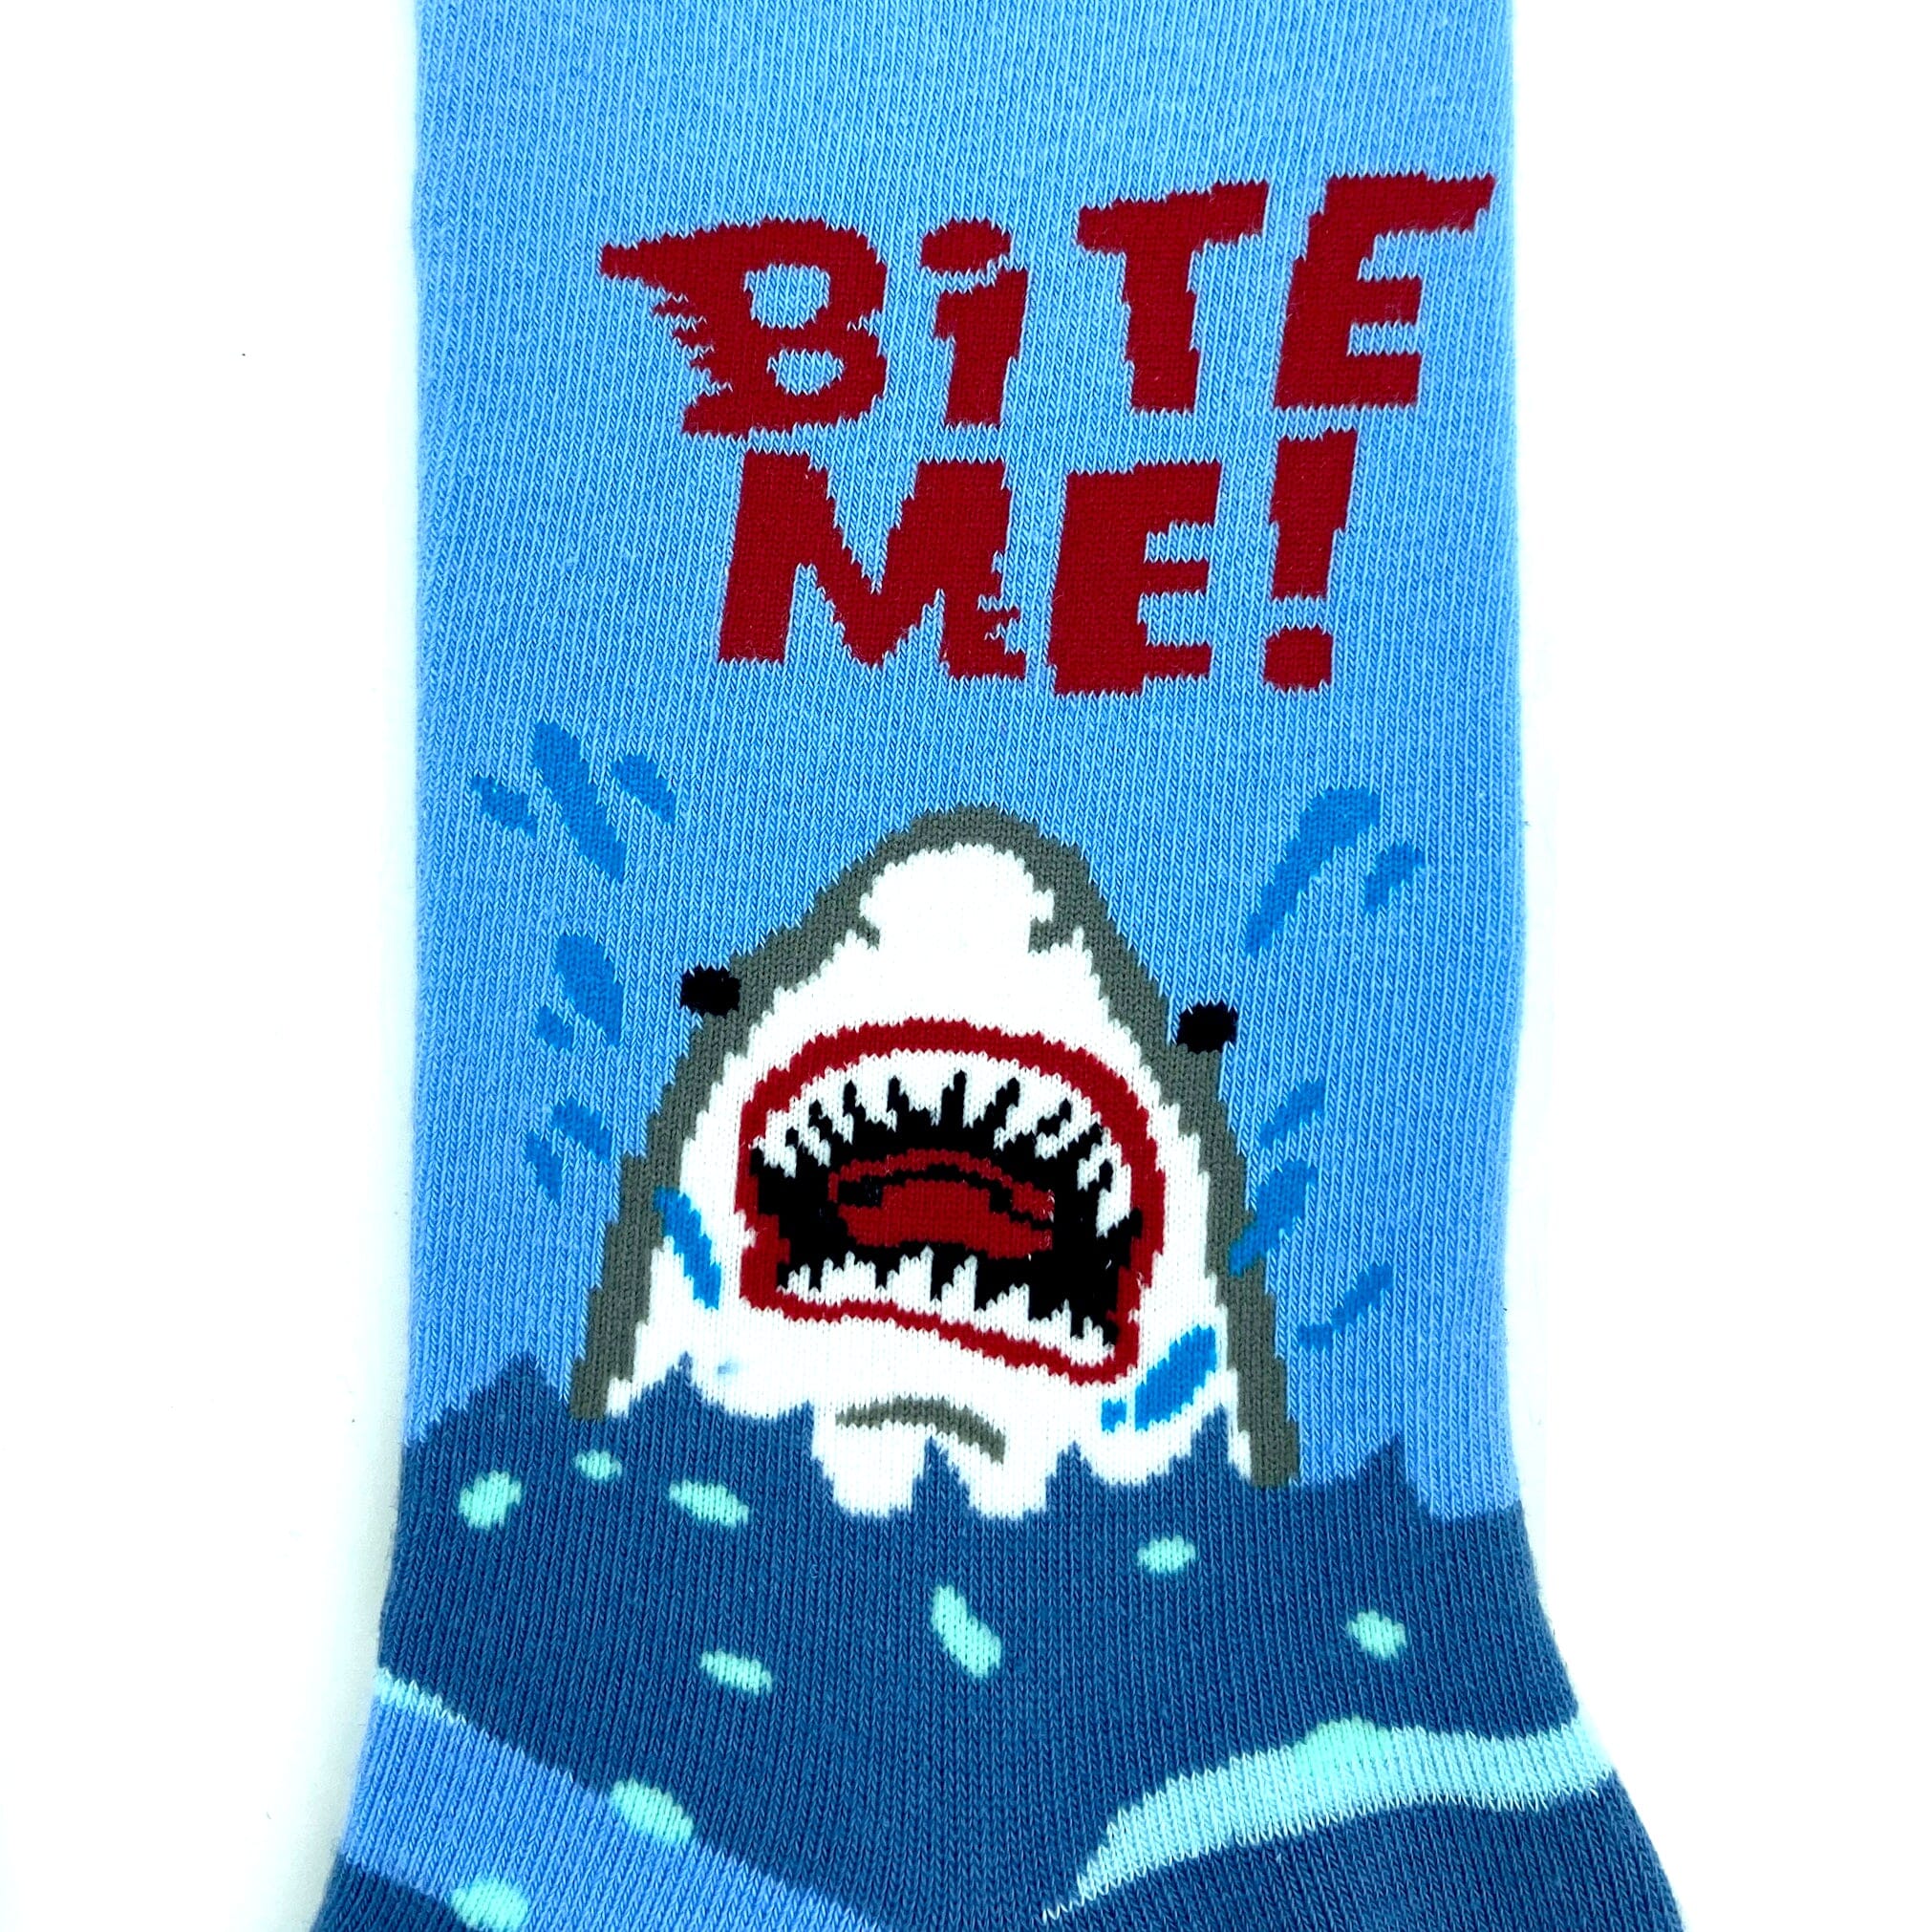 Classic Jaws Inspired Shark Patterned Novelty Crew Socks in Bright Blue